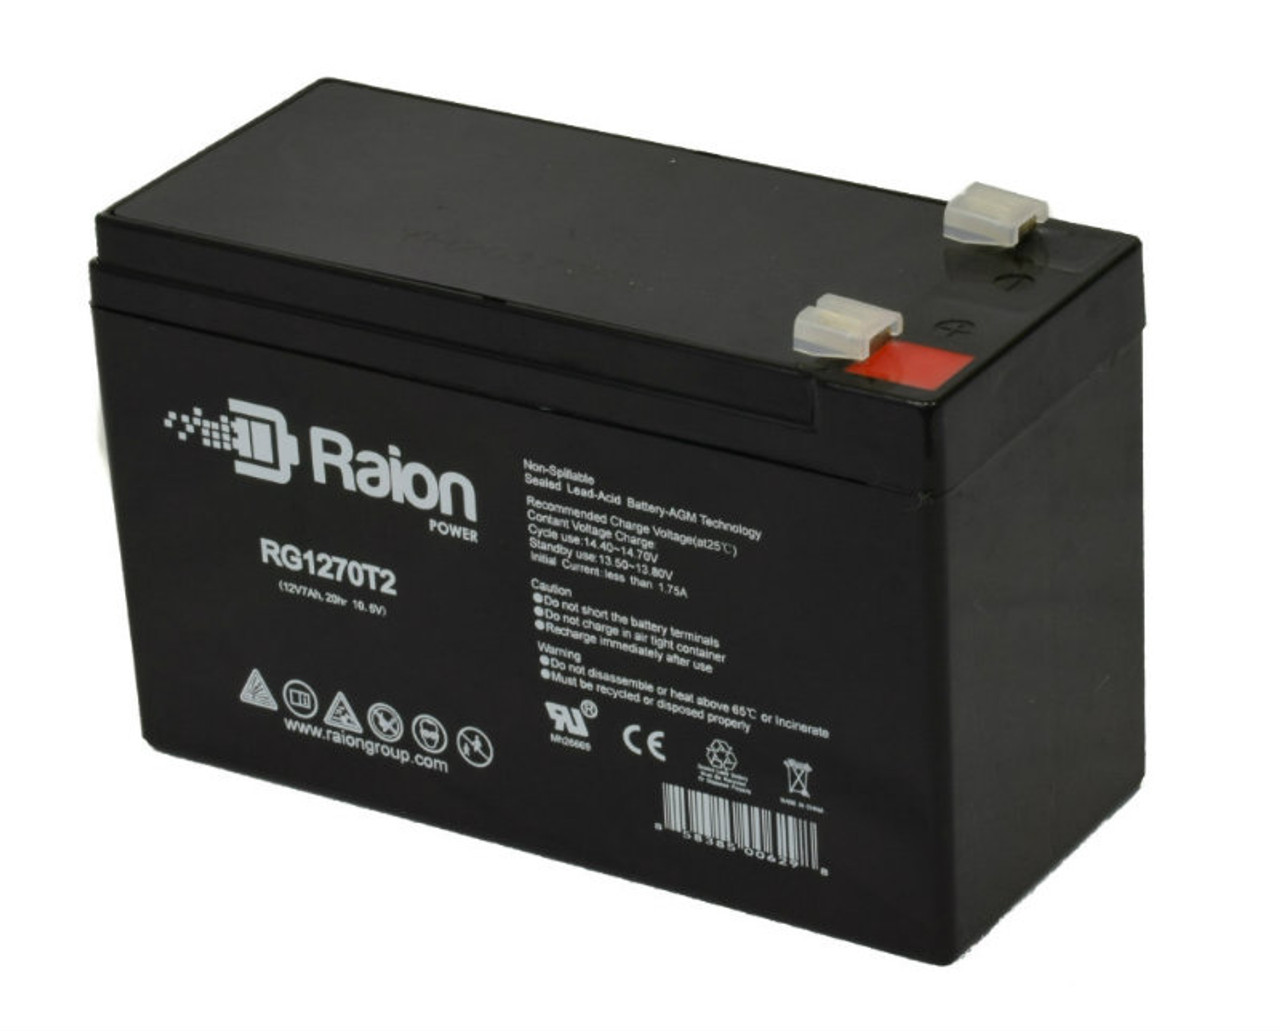 Raion Power RG1270T1 12V 7Ah Non-Spillable Replacement Battery for Technacell EP126026